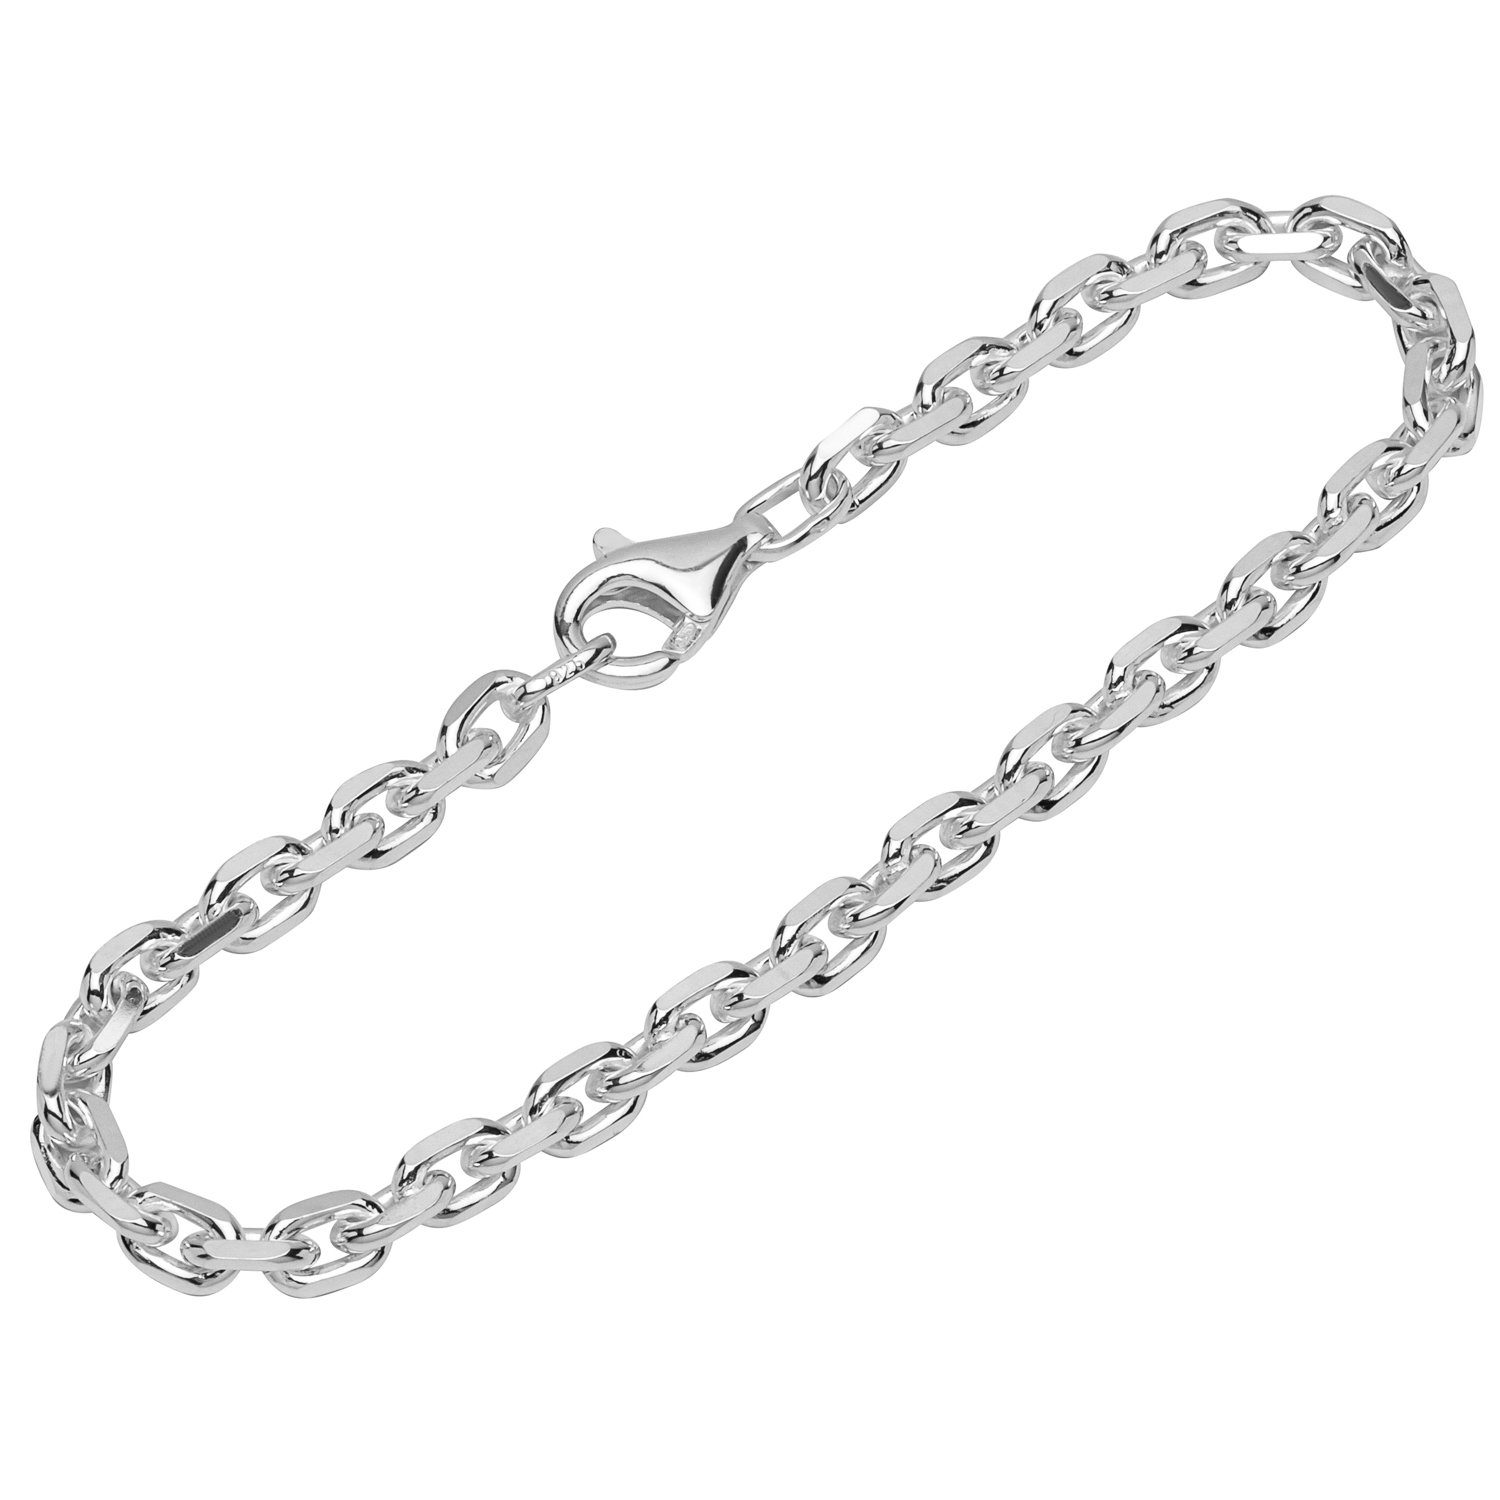 NKlaus Silberarmband Armband 925 Stück), 4 Ankerkette 19cm (1 in fach Germany Silber Made Sterling